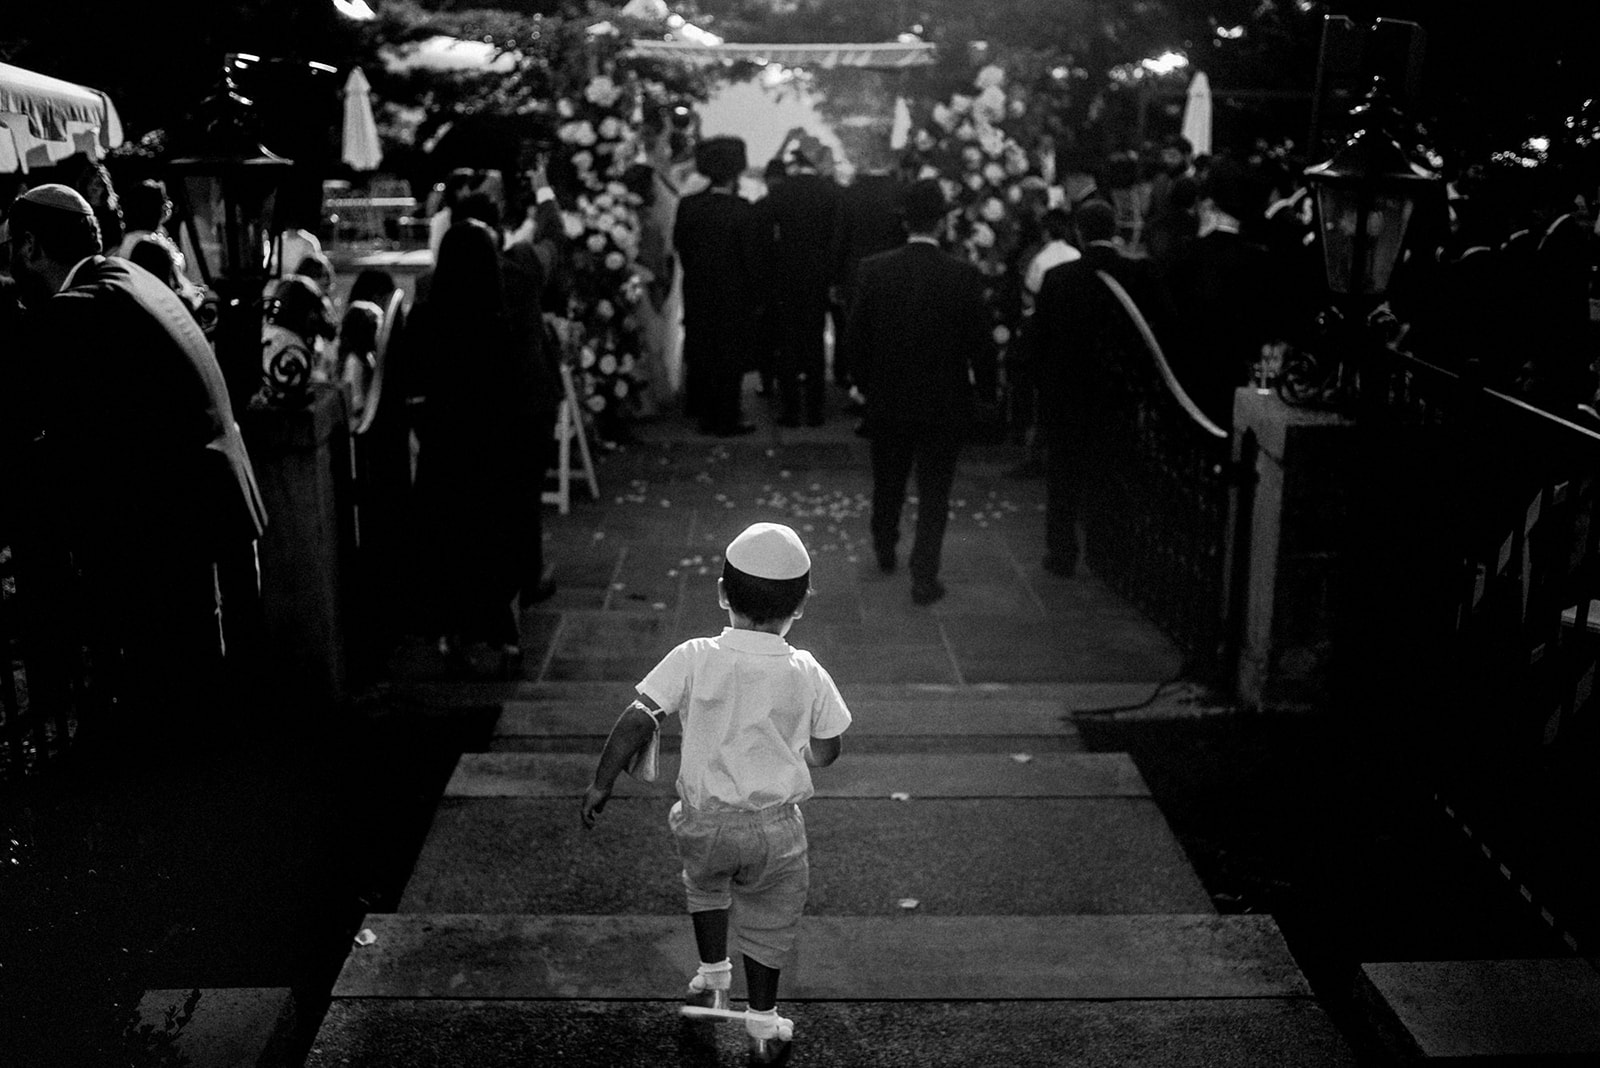 jewish little boy running towards chuppah in black and white image